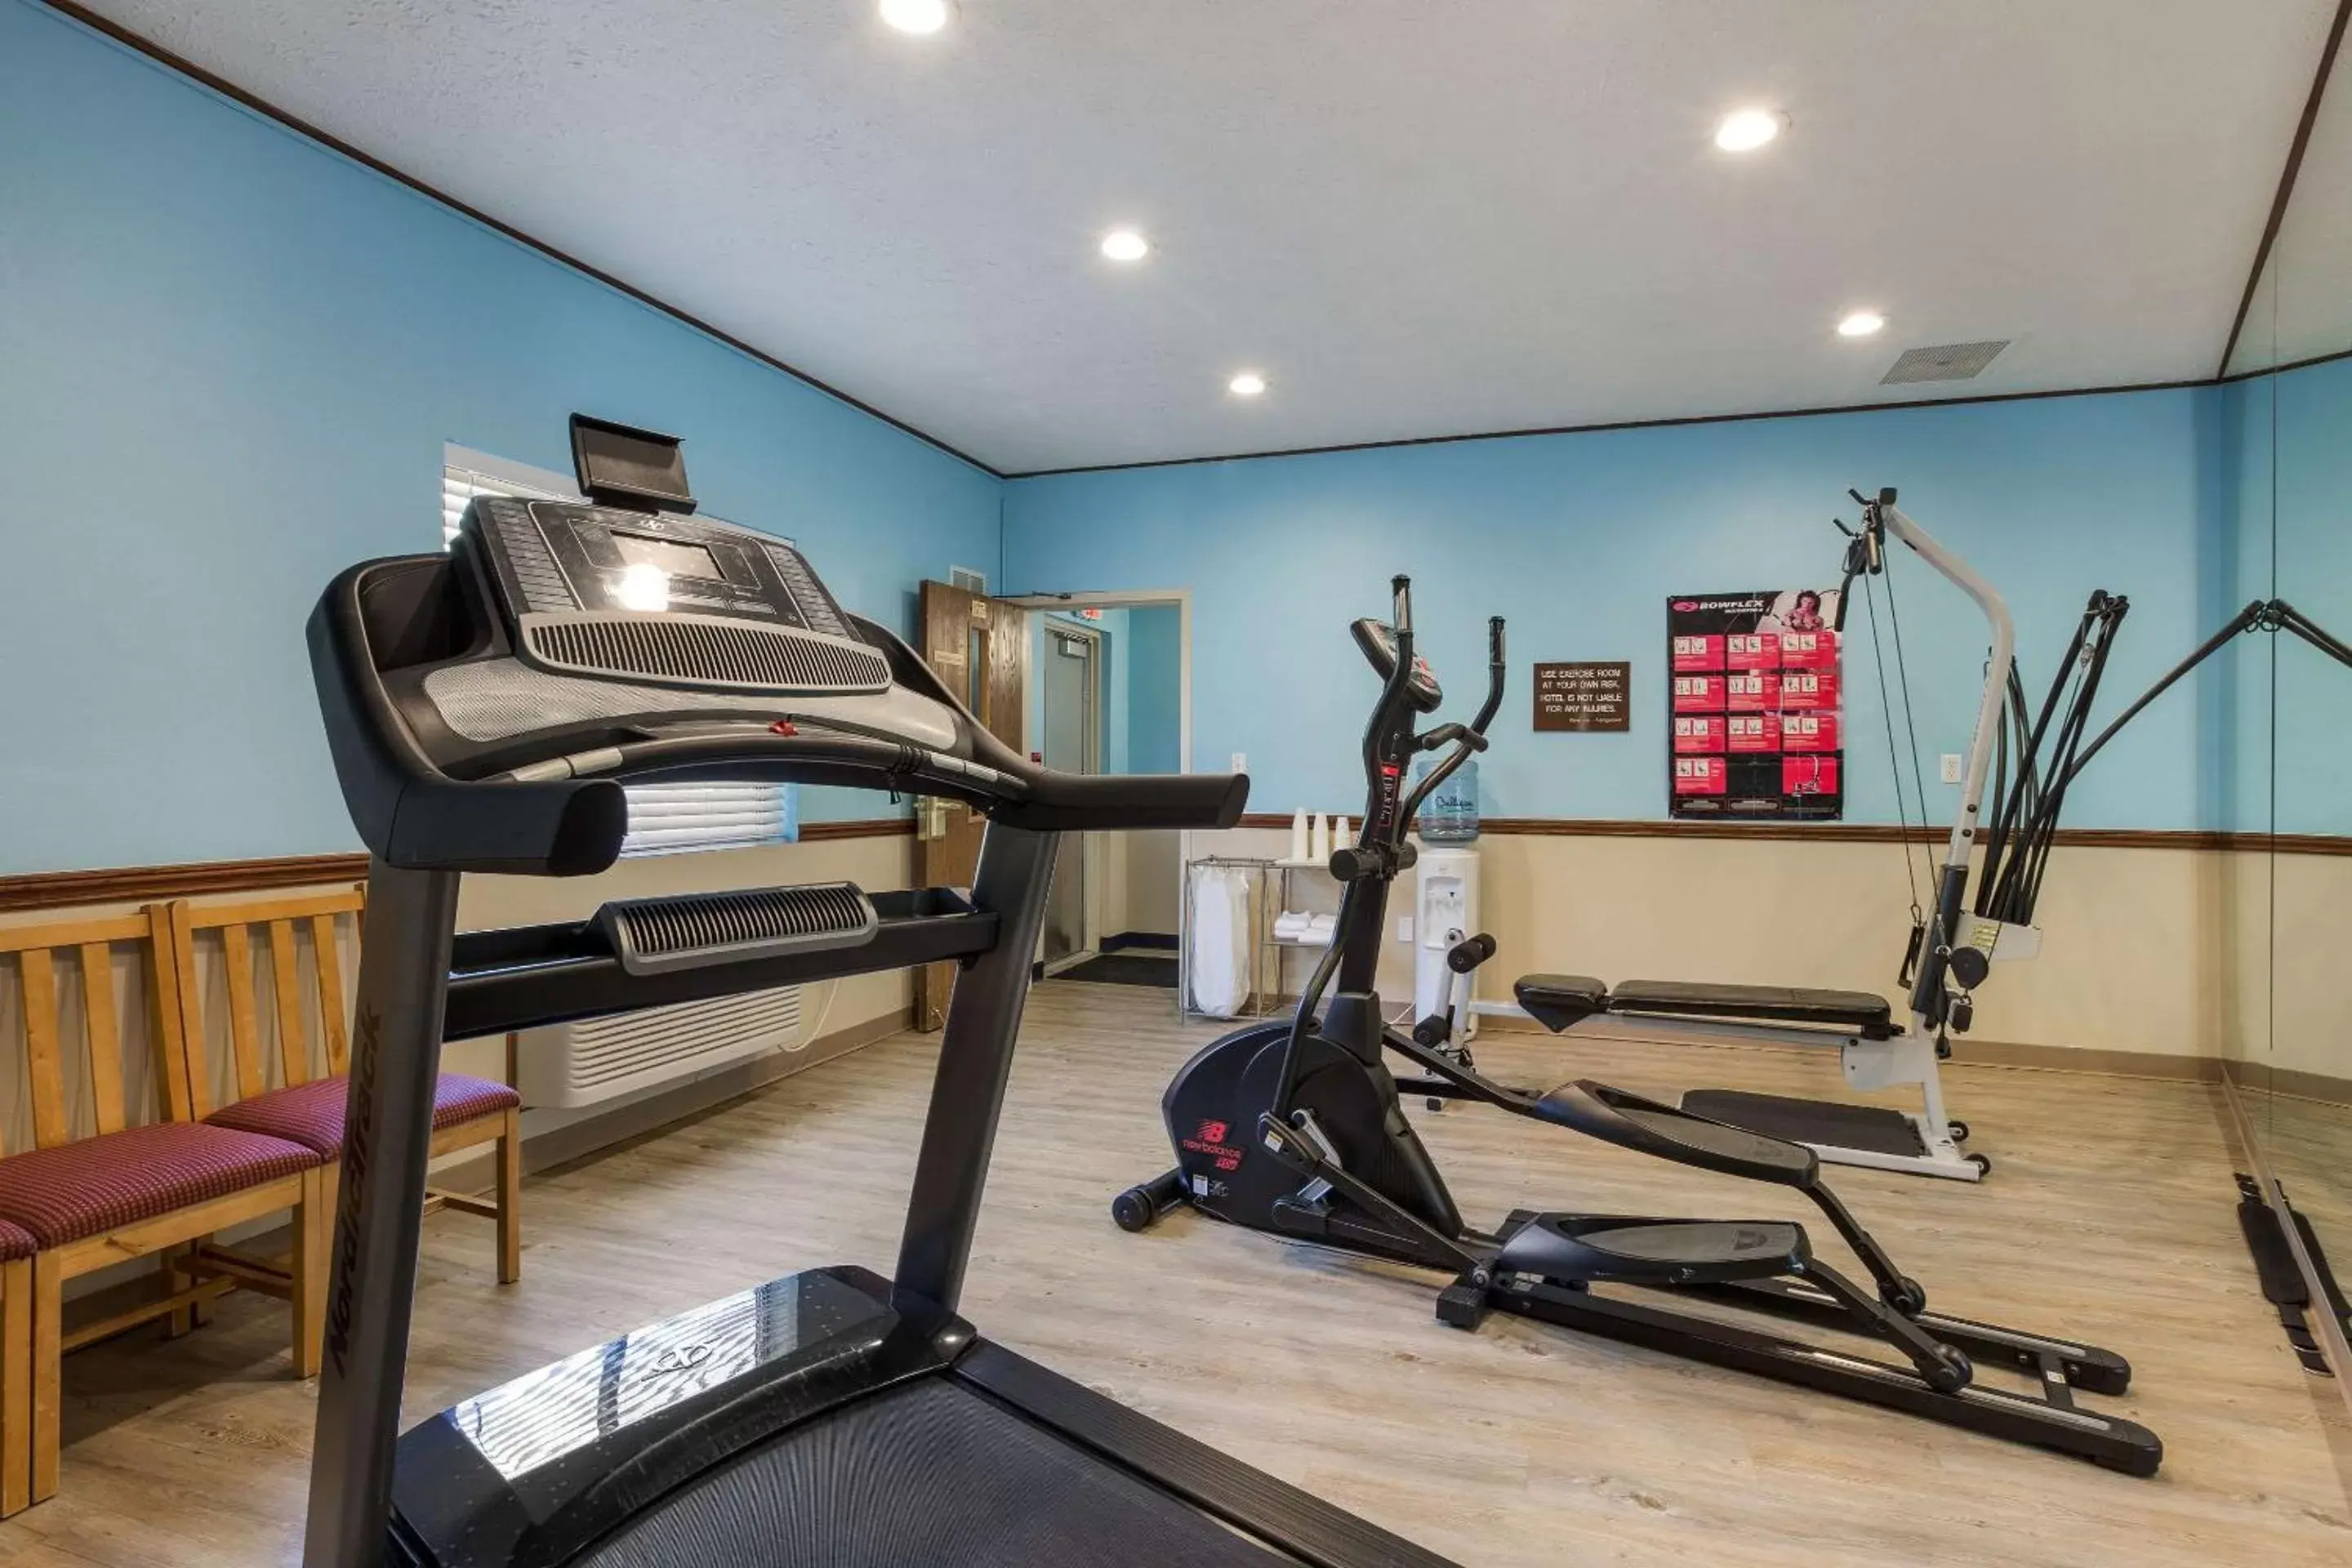 Fitness centre/facilities, Fitness Center/Facilities in Quality Inn - Petoskey